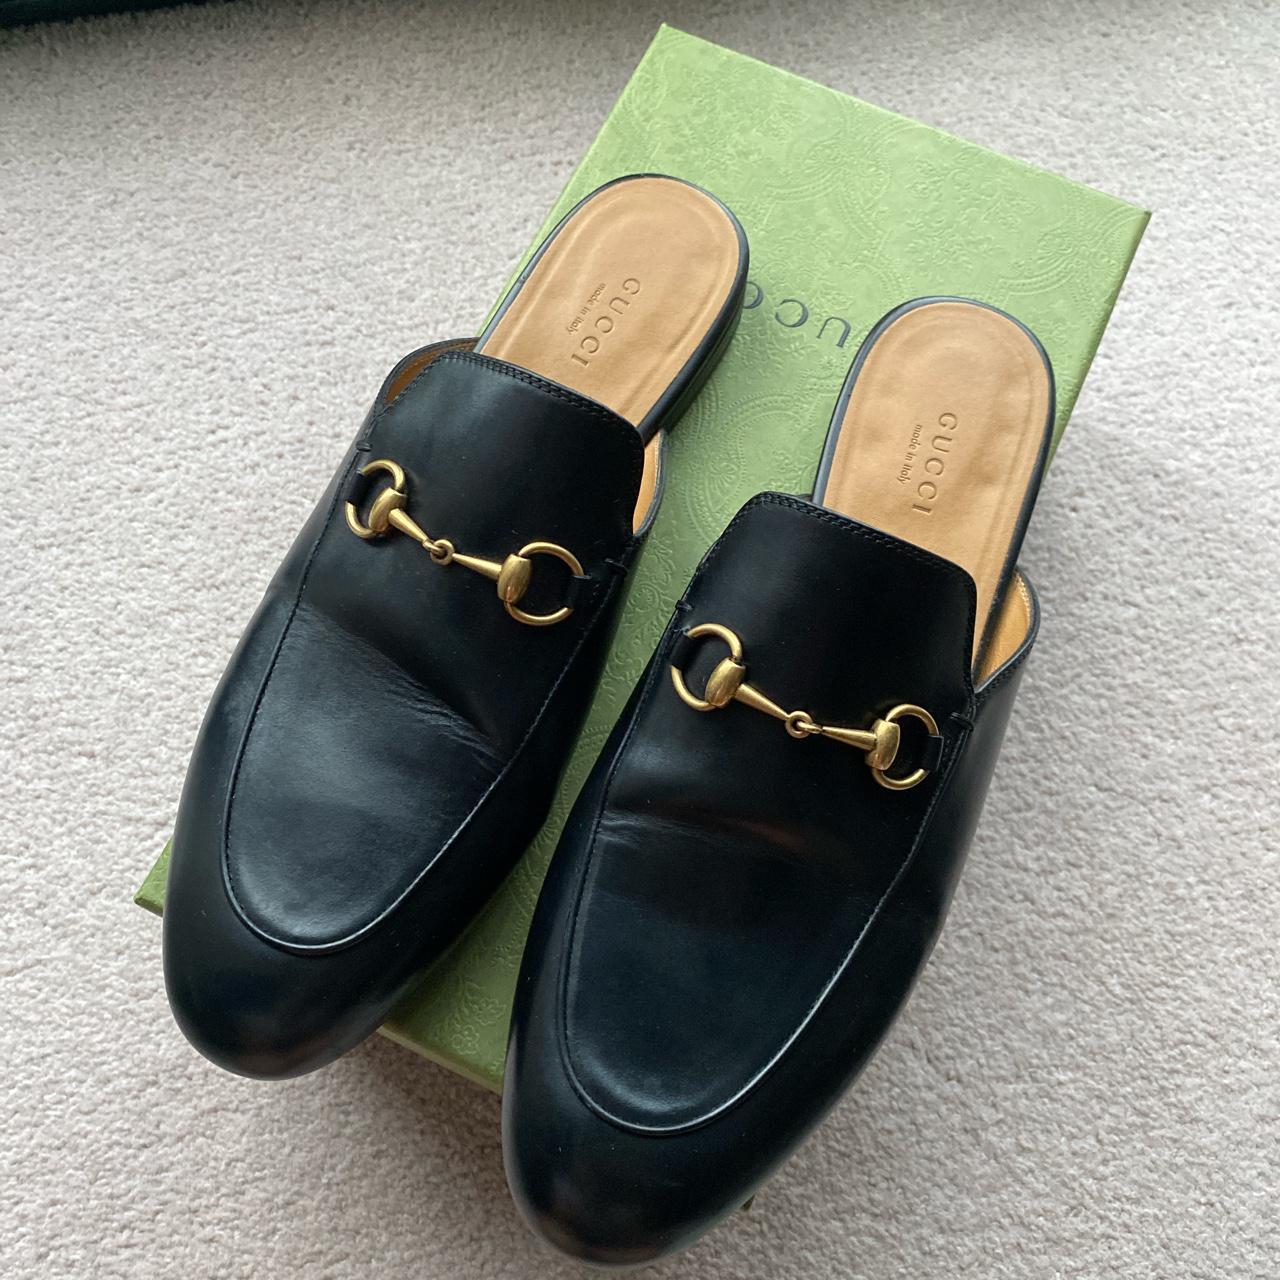 Product Image 1 - Women’s Gucci Princetown leather shoes.